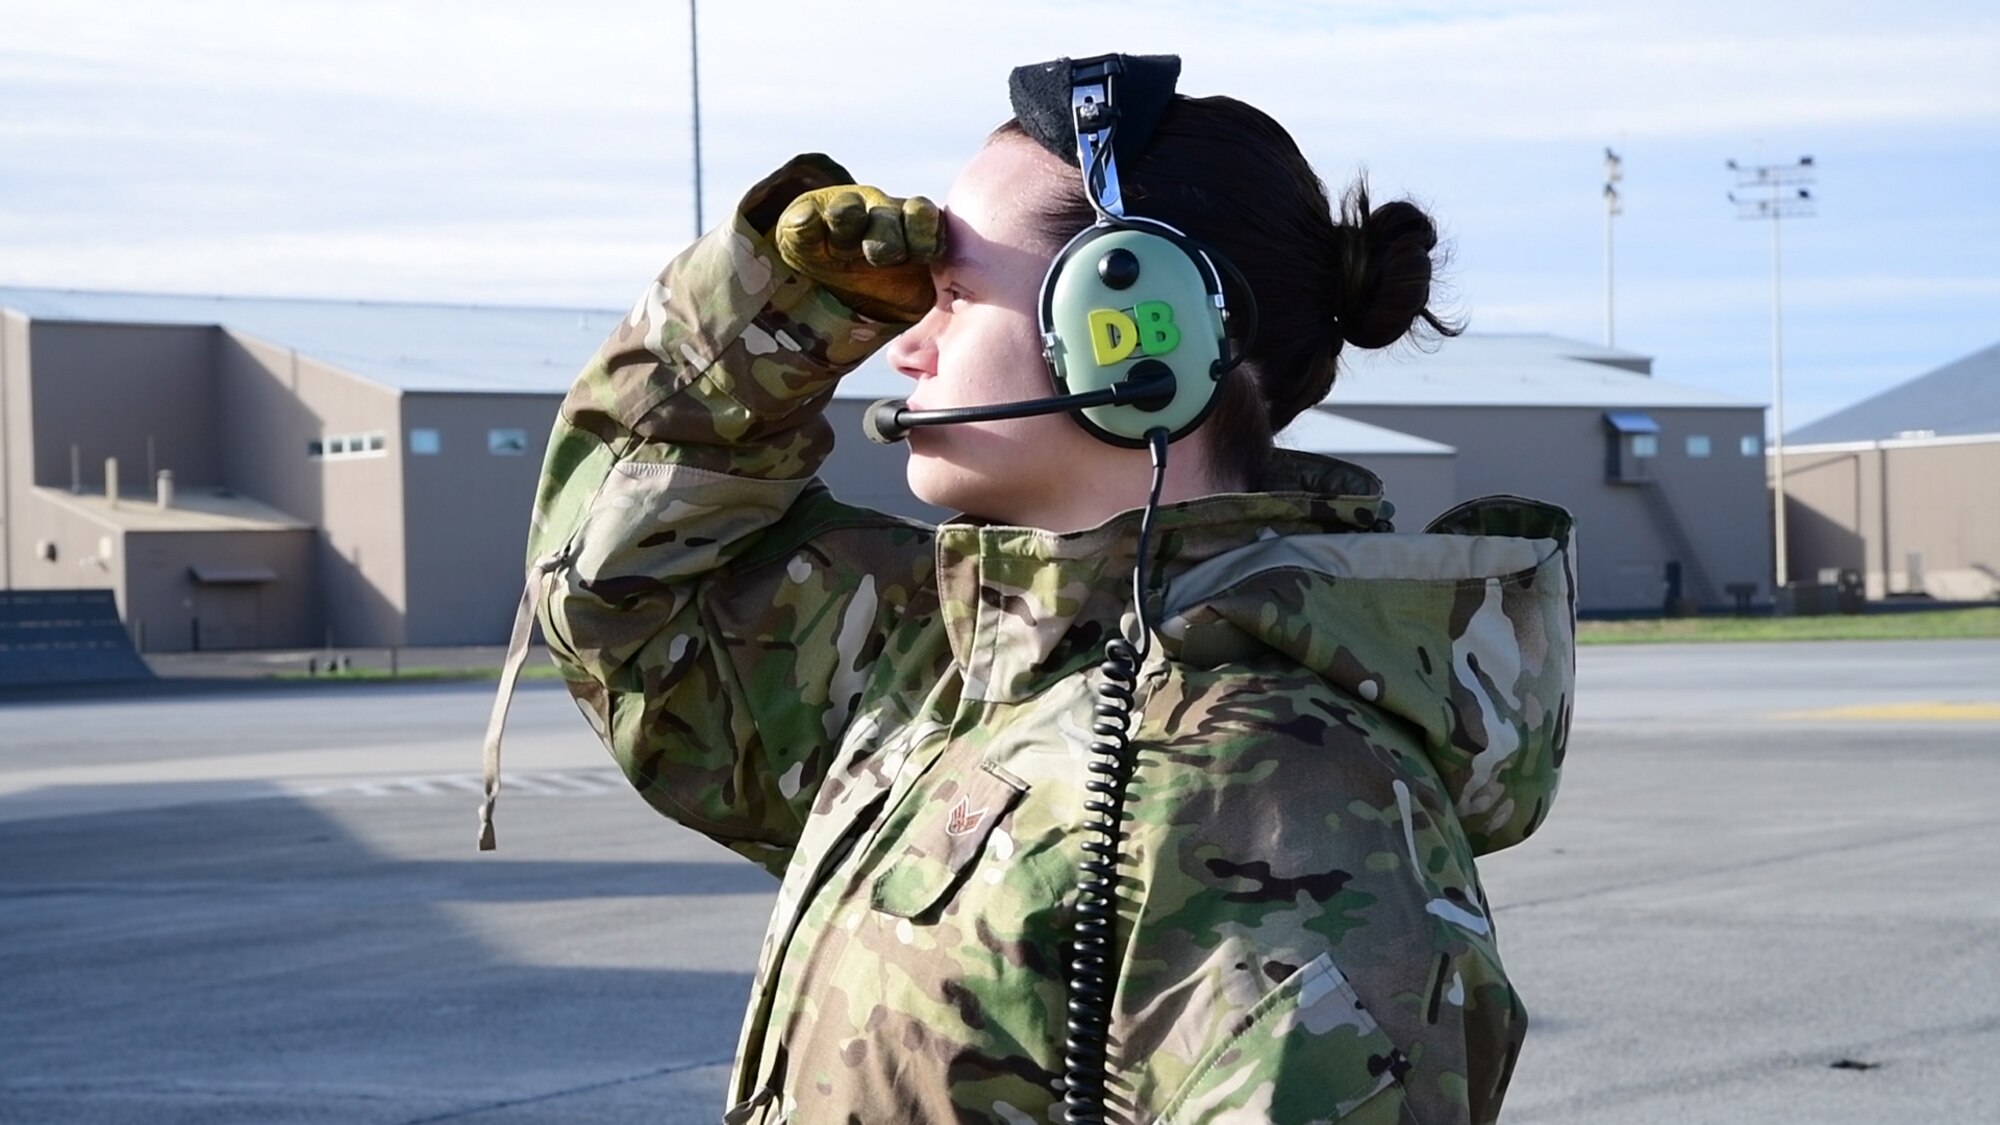 Senior Airman Danele Belovarac, 3rd Airlift Squadron C-17 loadmaster, shields her eyes from the sun while pilots do final pre-flight checks, Sept. 24, 2019, at Fairchild AFB, Wash.,  in support of exercise Mobility Guardian 2019. Exercise Mobility Guardian is Air Mobility Command's premier large-scale mobility exercise. Through robust and relevant training, Mobility Guardian improves the readiness and capabilities of Mobility Airmen to deliver rapid global mobility and builds a more lethal and ready Air Force..(U.S. Air Force photo by Tech. Sgt. Esteban Esquivel).